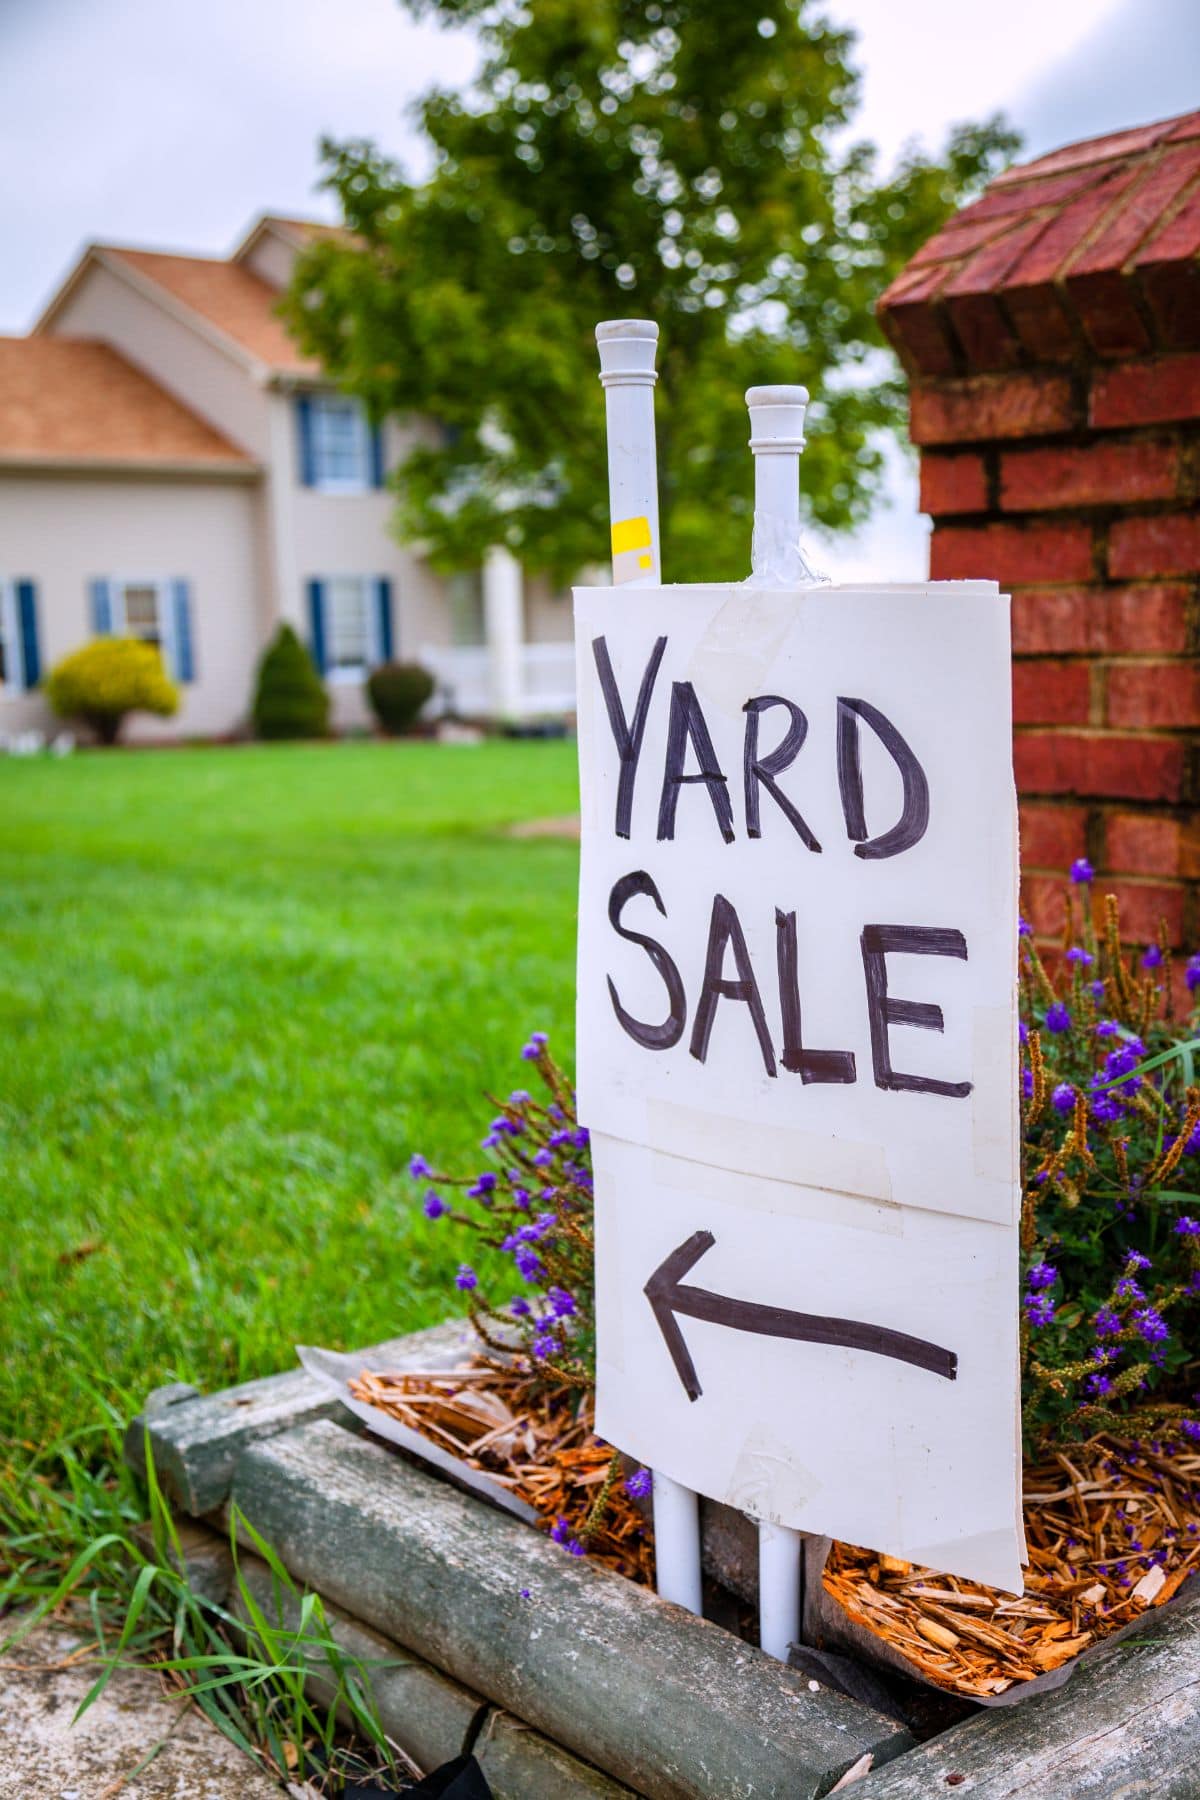 How to Easily Post Yard Sale on Facebook Marketplace